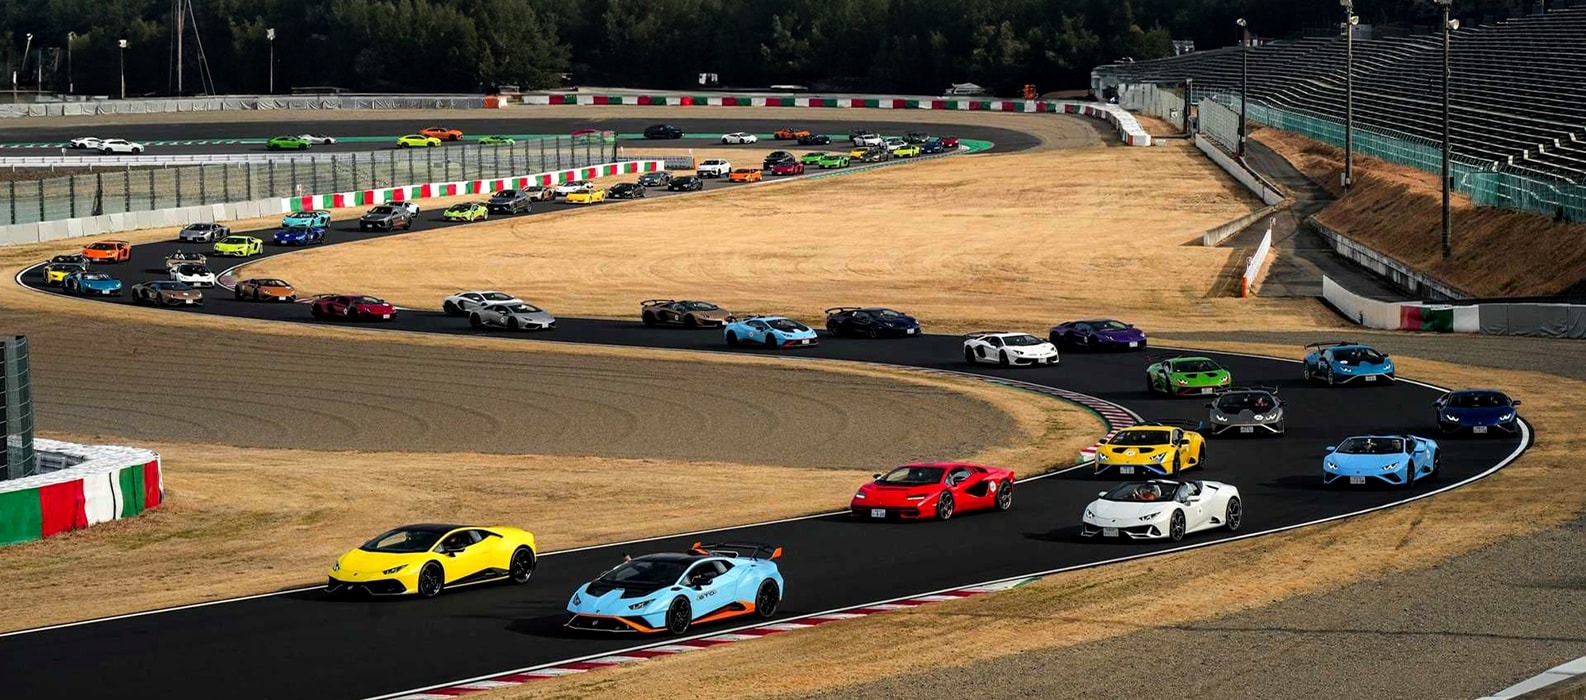 LAMBORGHINI ARENA: THE MOST EXTRAORDINARY EVENT IN OUR BRAND’S HISTORY IS COMING